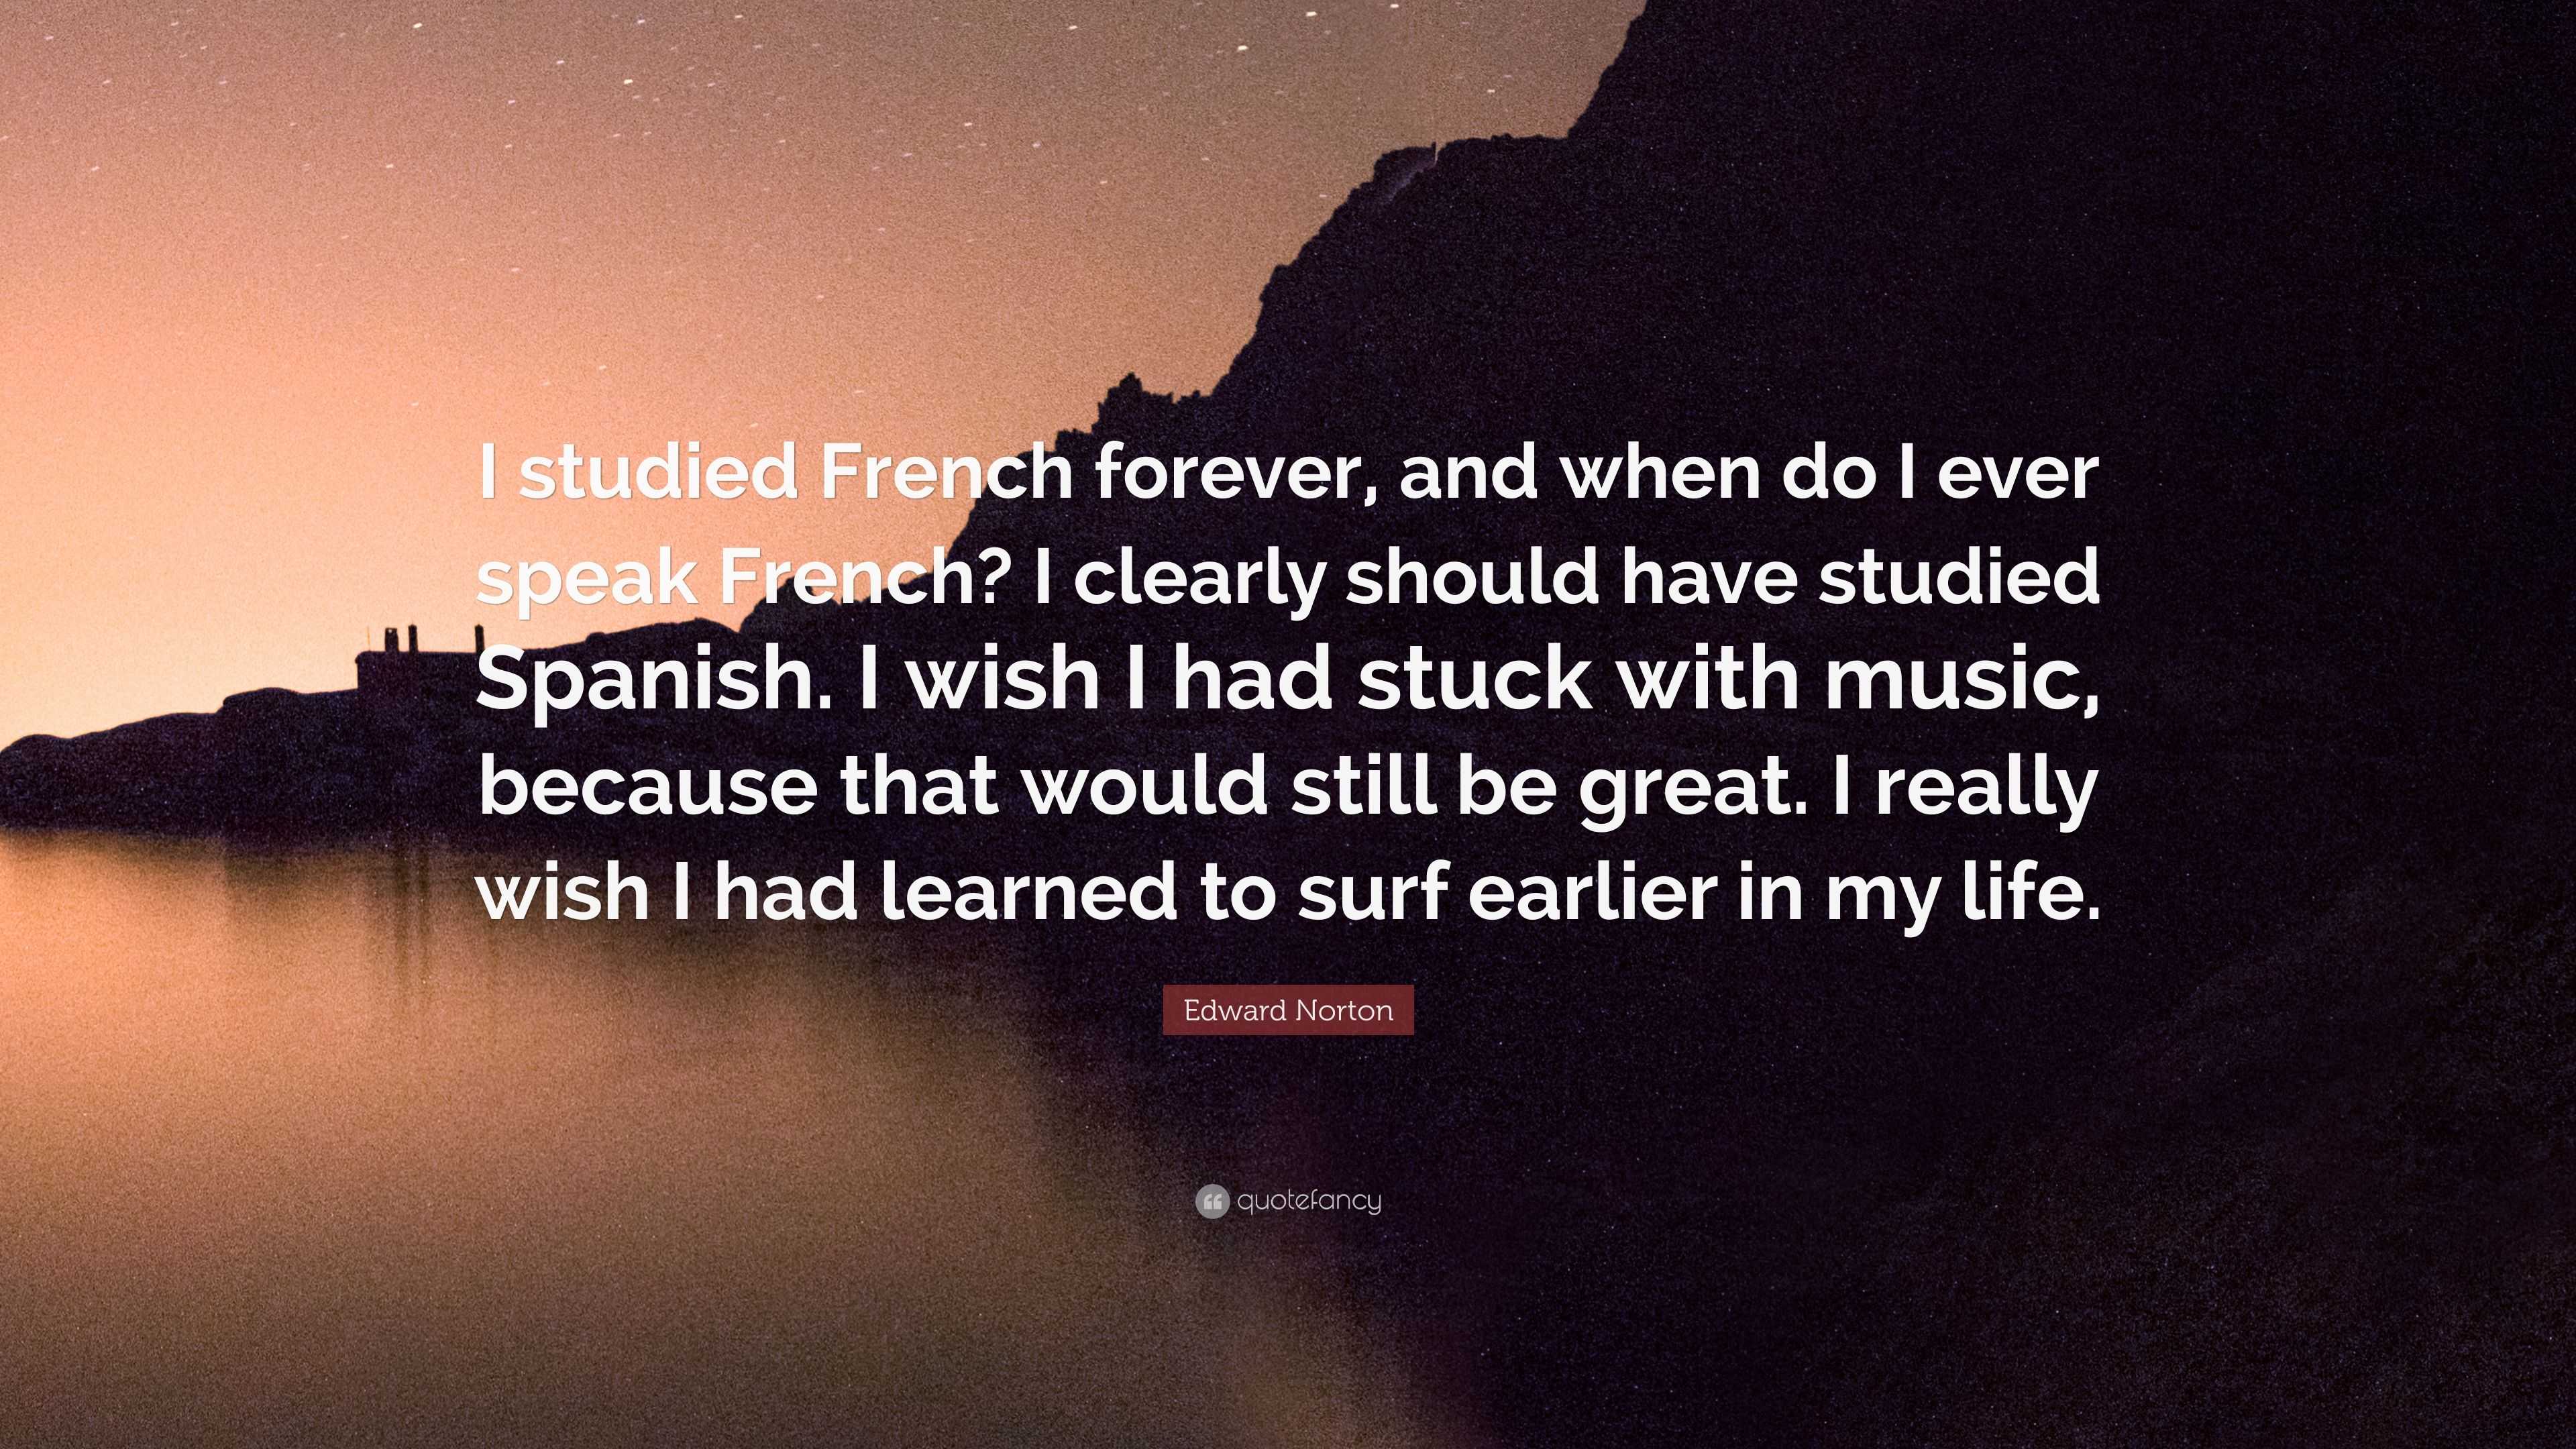 Edward Norton Quote “I stu d French forever and when do I ever speak